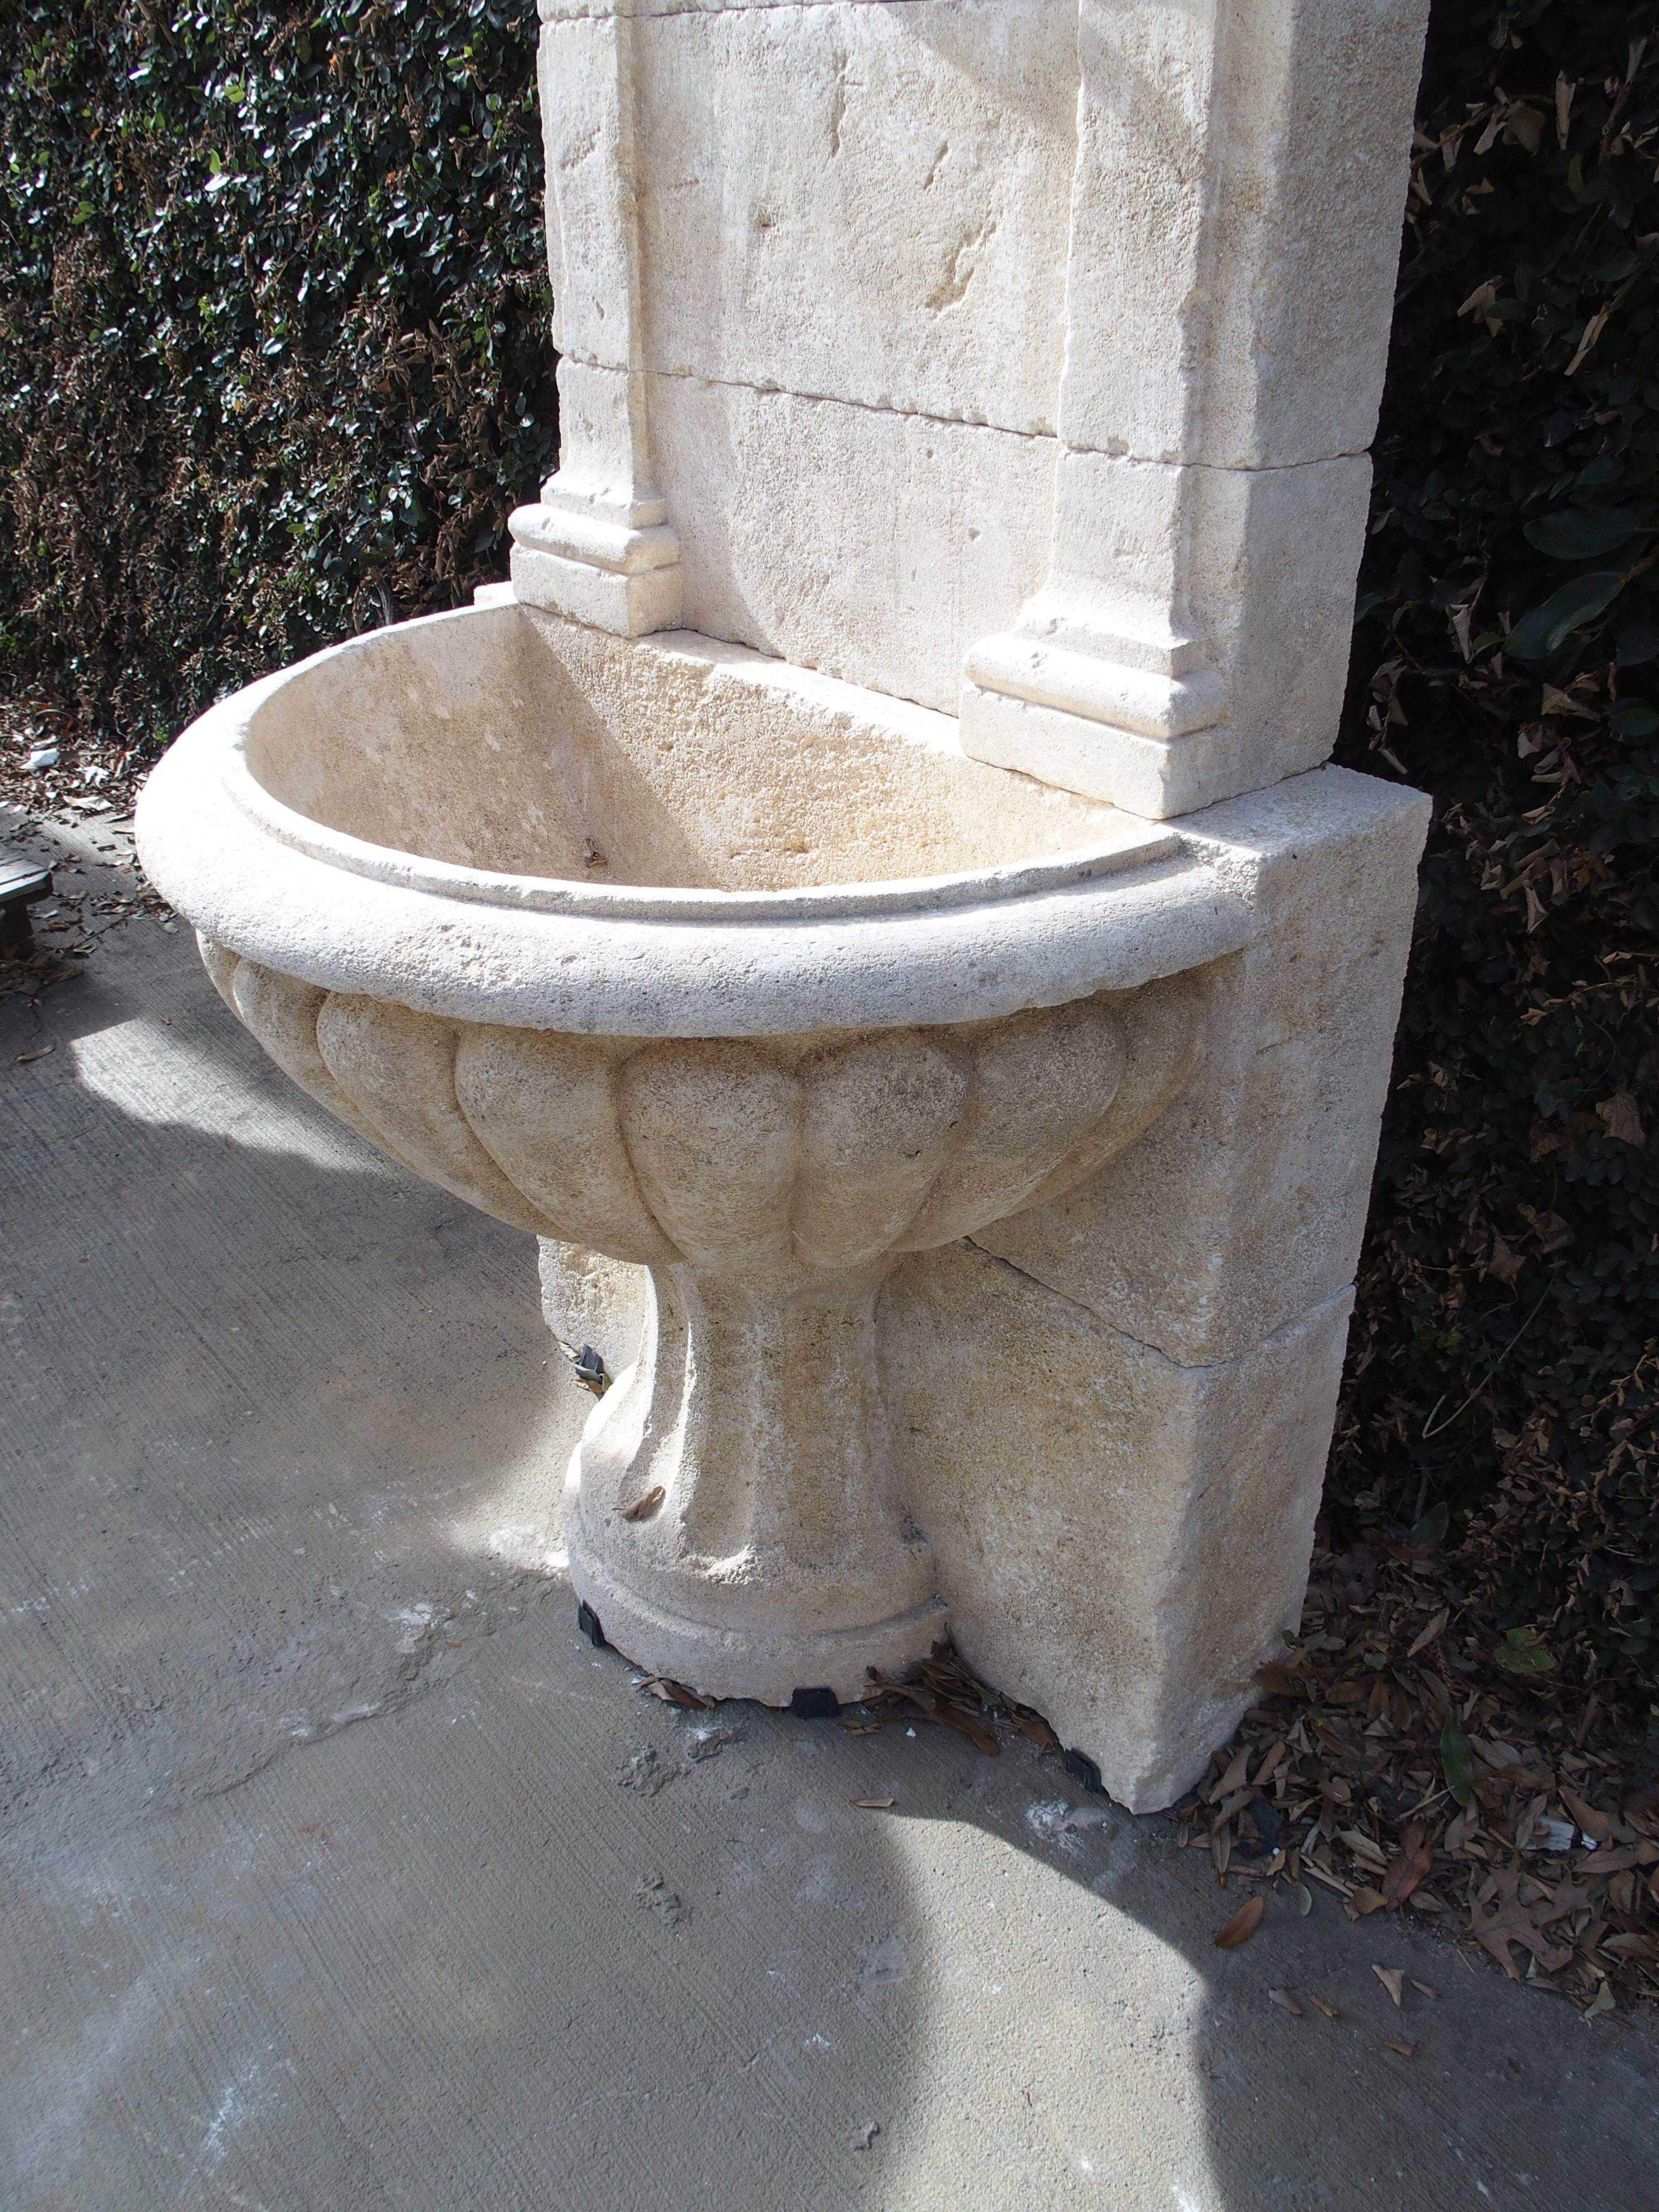 This stunning, hand-carved wall fountain from France has been designed with architectural ornamentation. There is a crown molding with pilaster capitals and pilasters on either side ending in a plinth at the lobed basin. It is handmade from